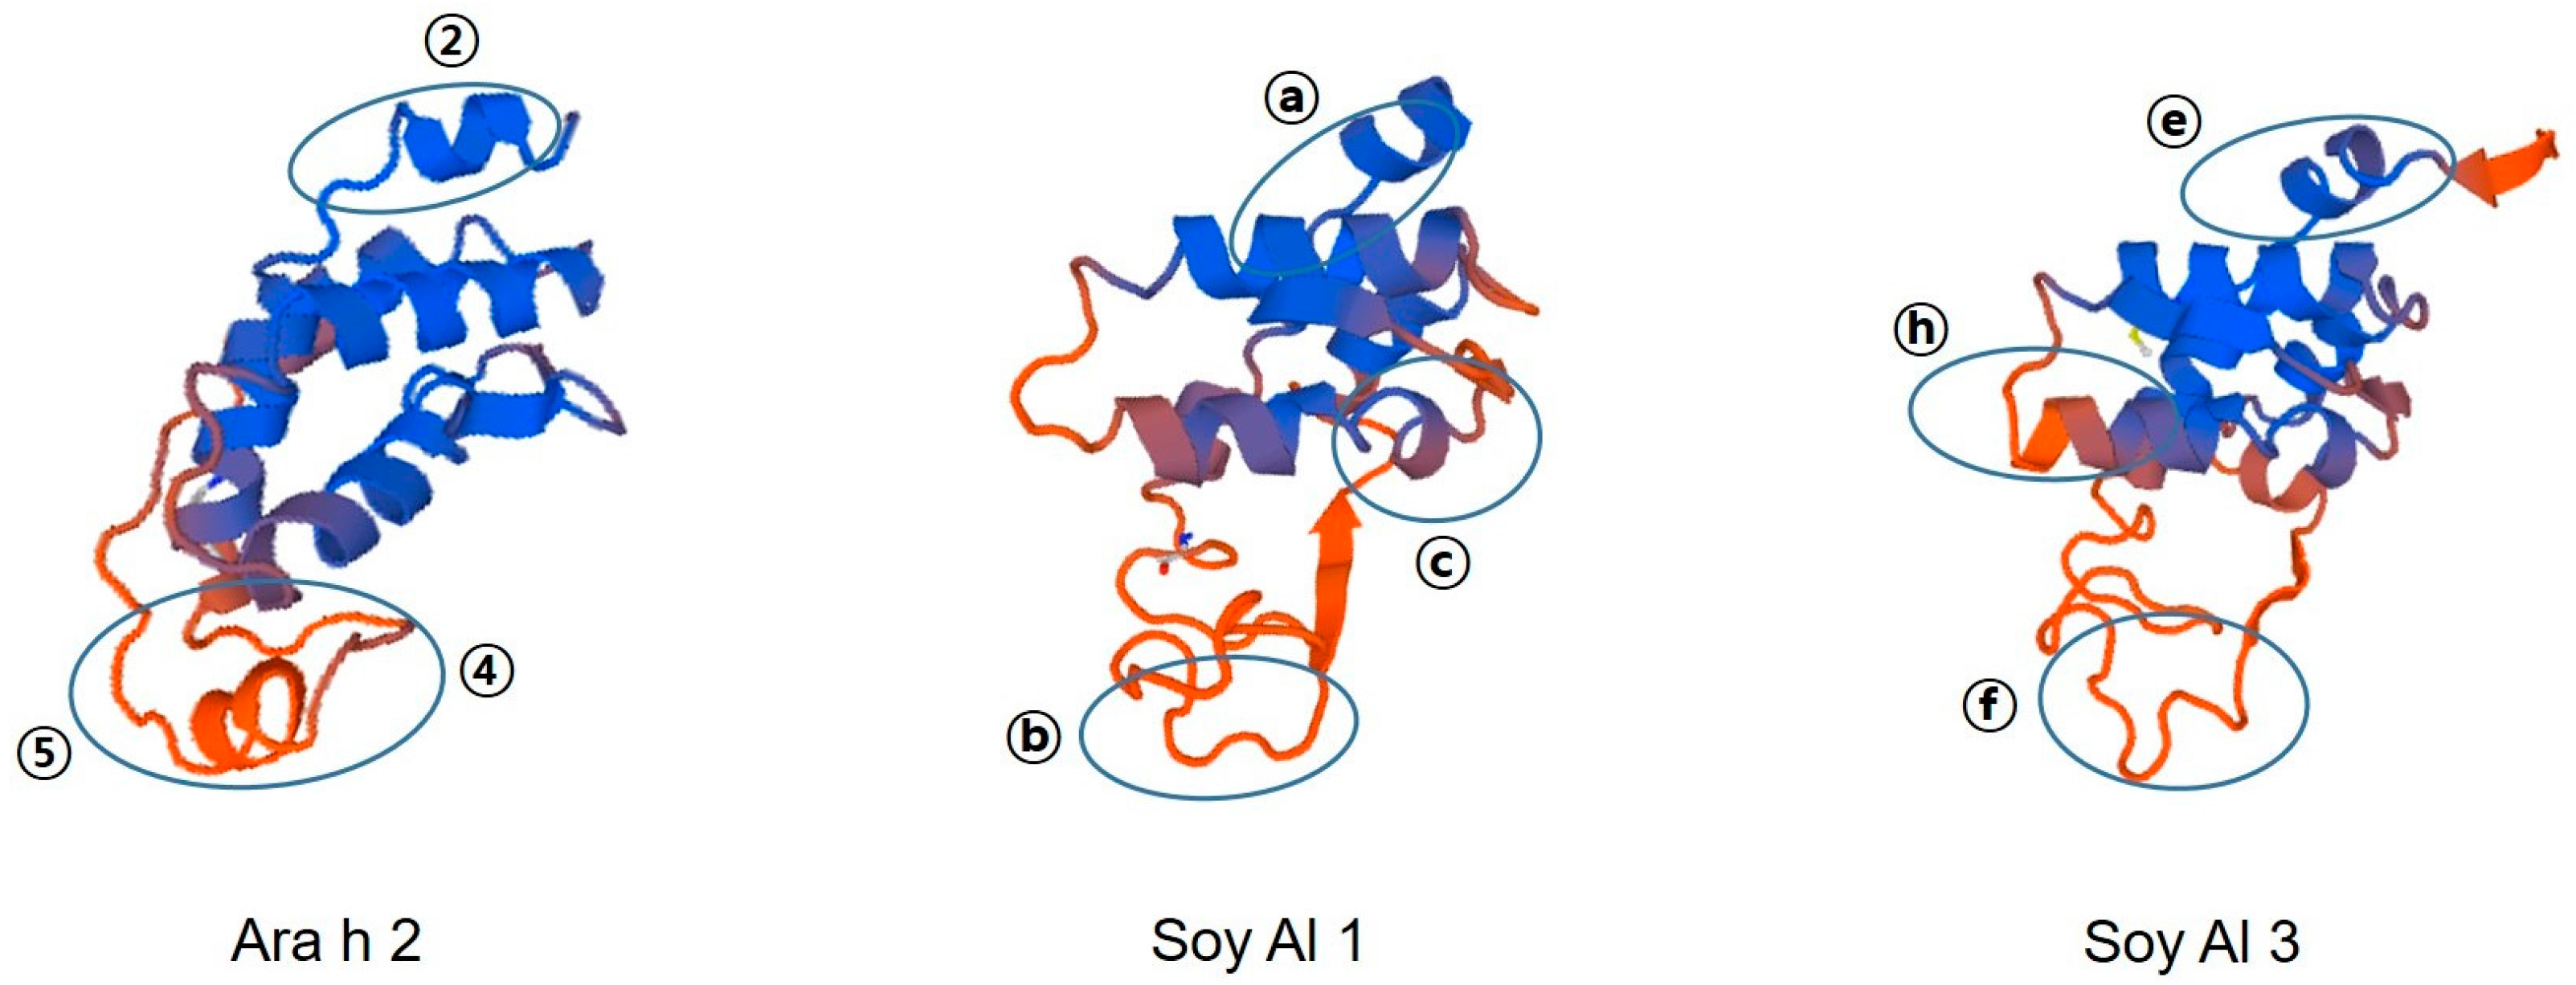 Molecules | Free Full-Text | What Characteristics Confer Proteins the  Ability to Induce Allergic Responses? IgE Epitope Mapping and Comparison of  the Structure of Soybean 2S Albumins and Ara h 2 | HTML